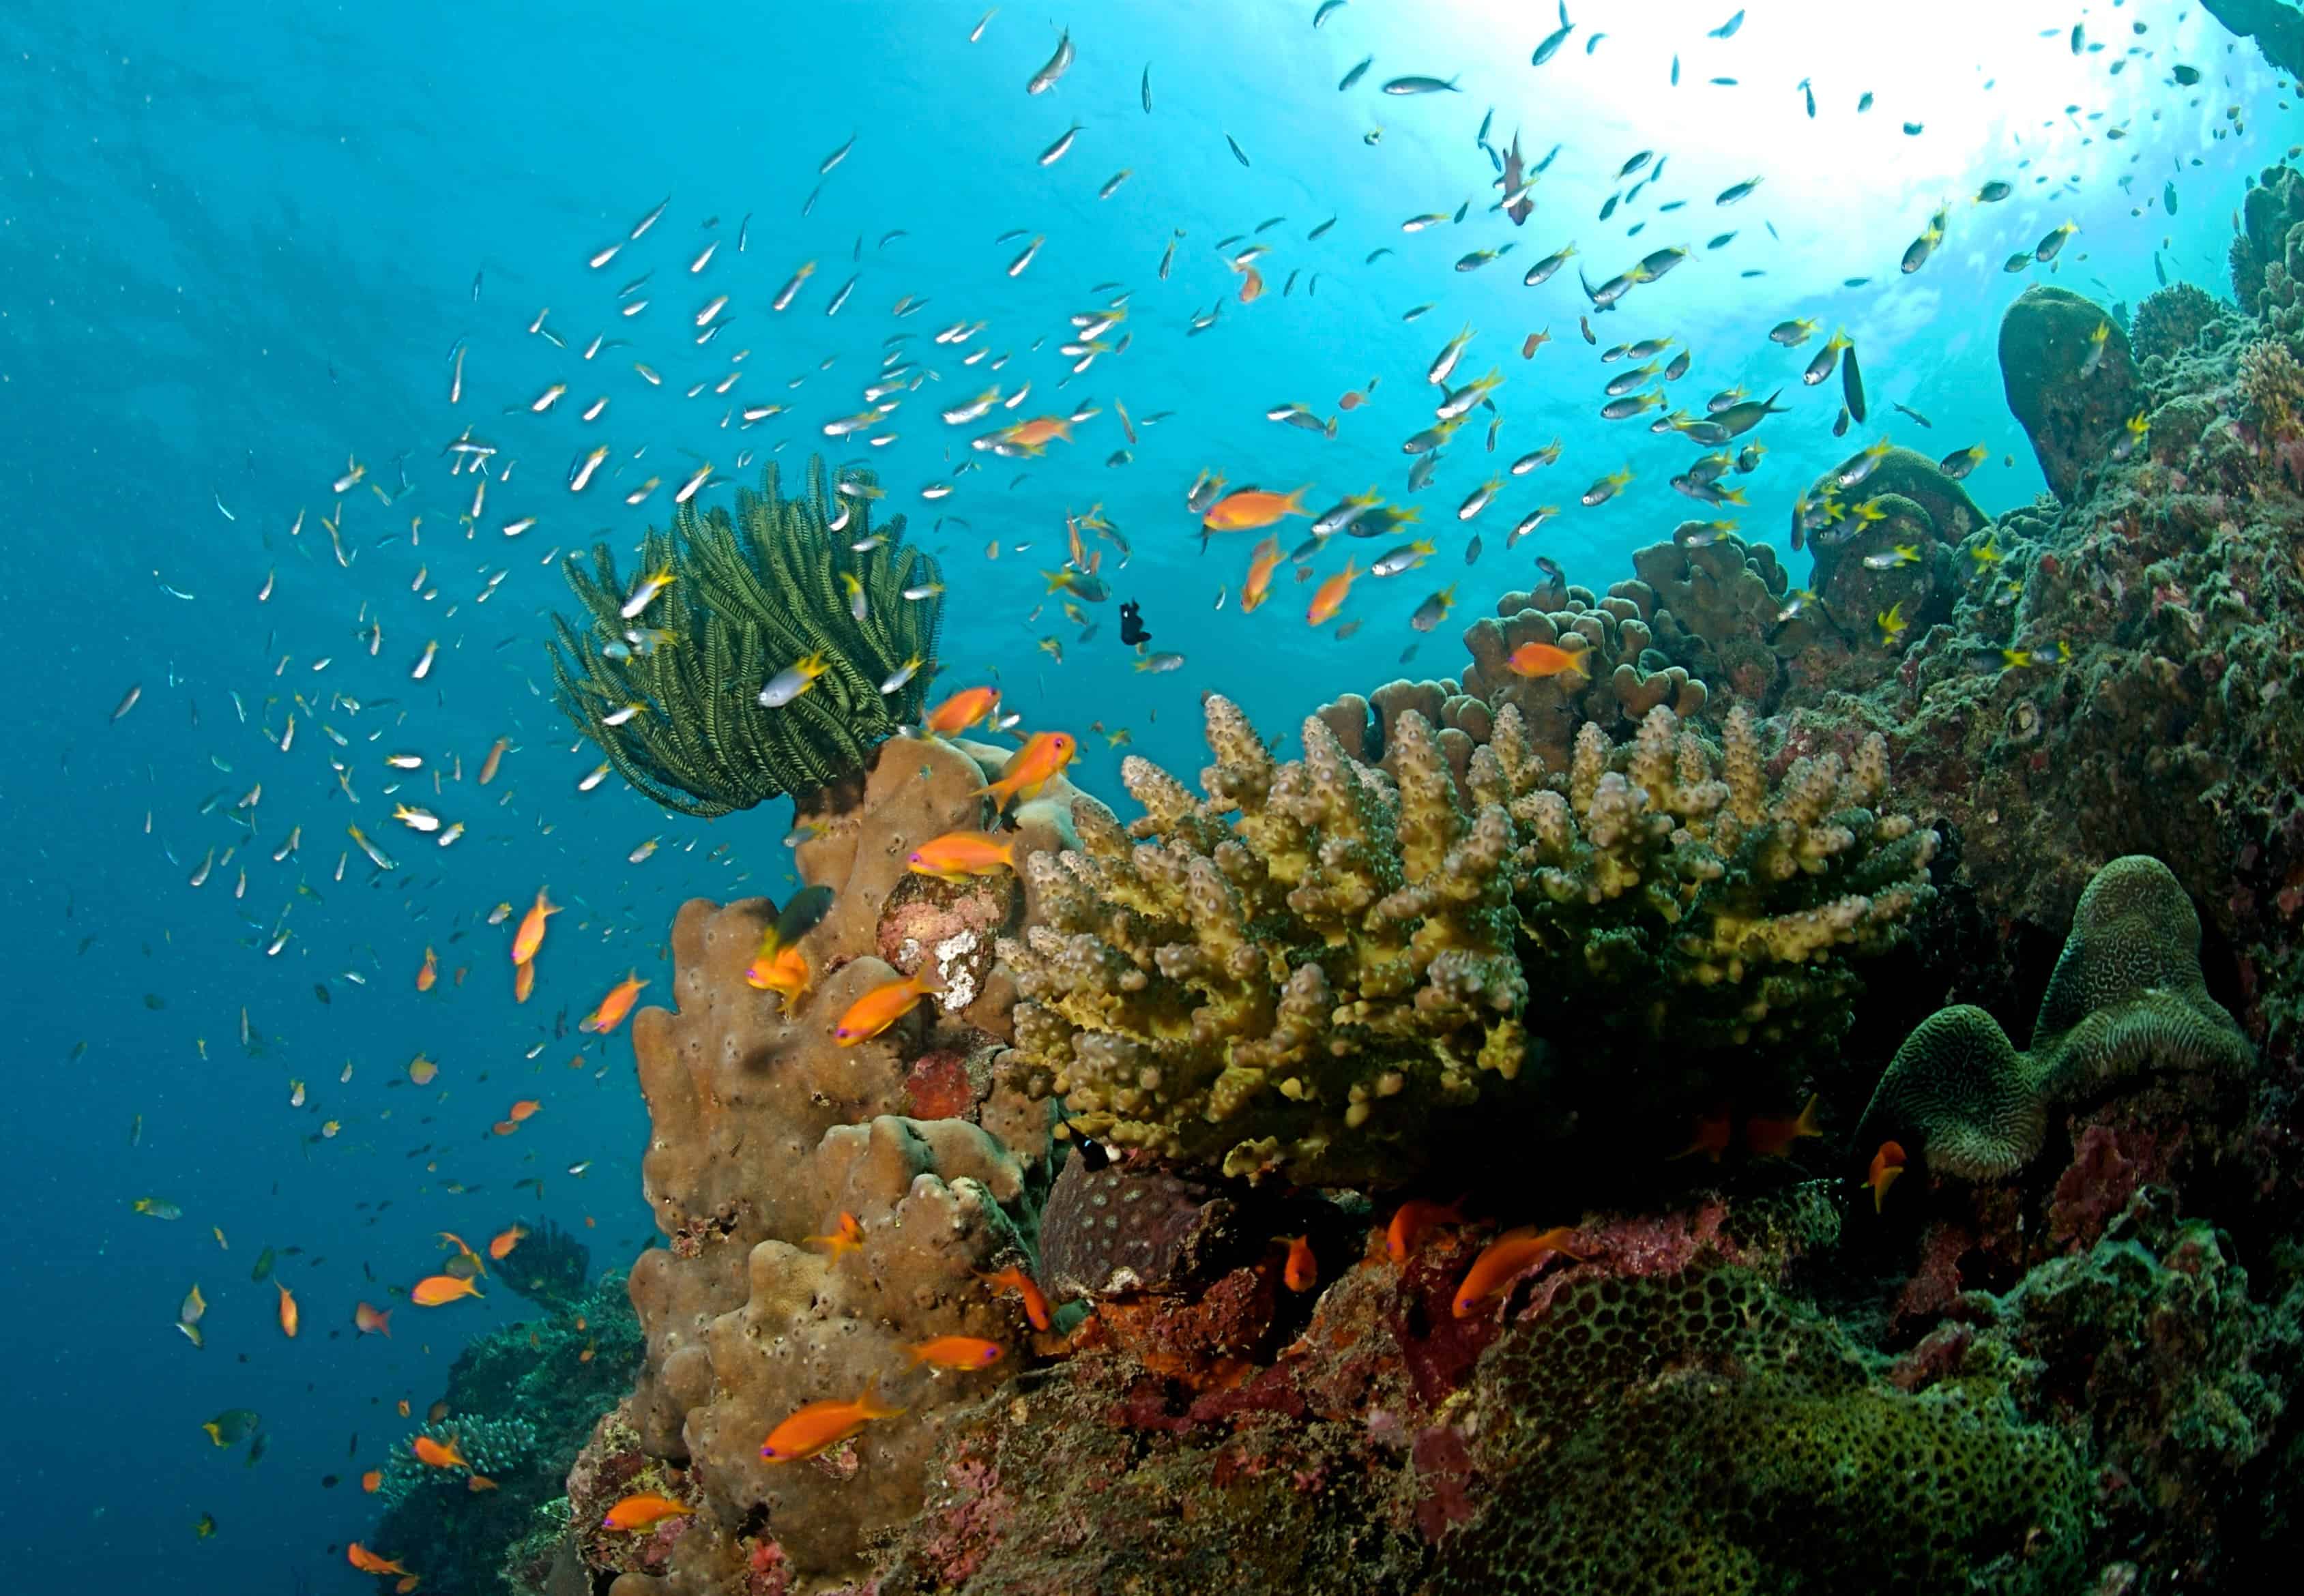 Coral reefs are extremely diverse, and extremely threatened. Image credits: Ritiks.